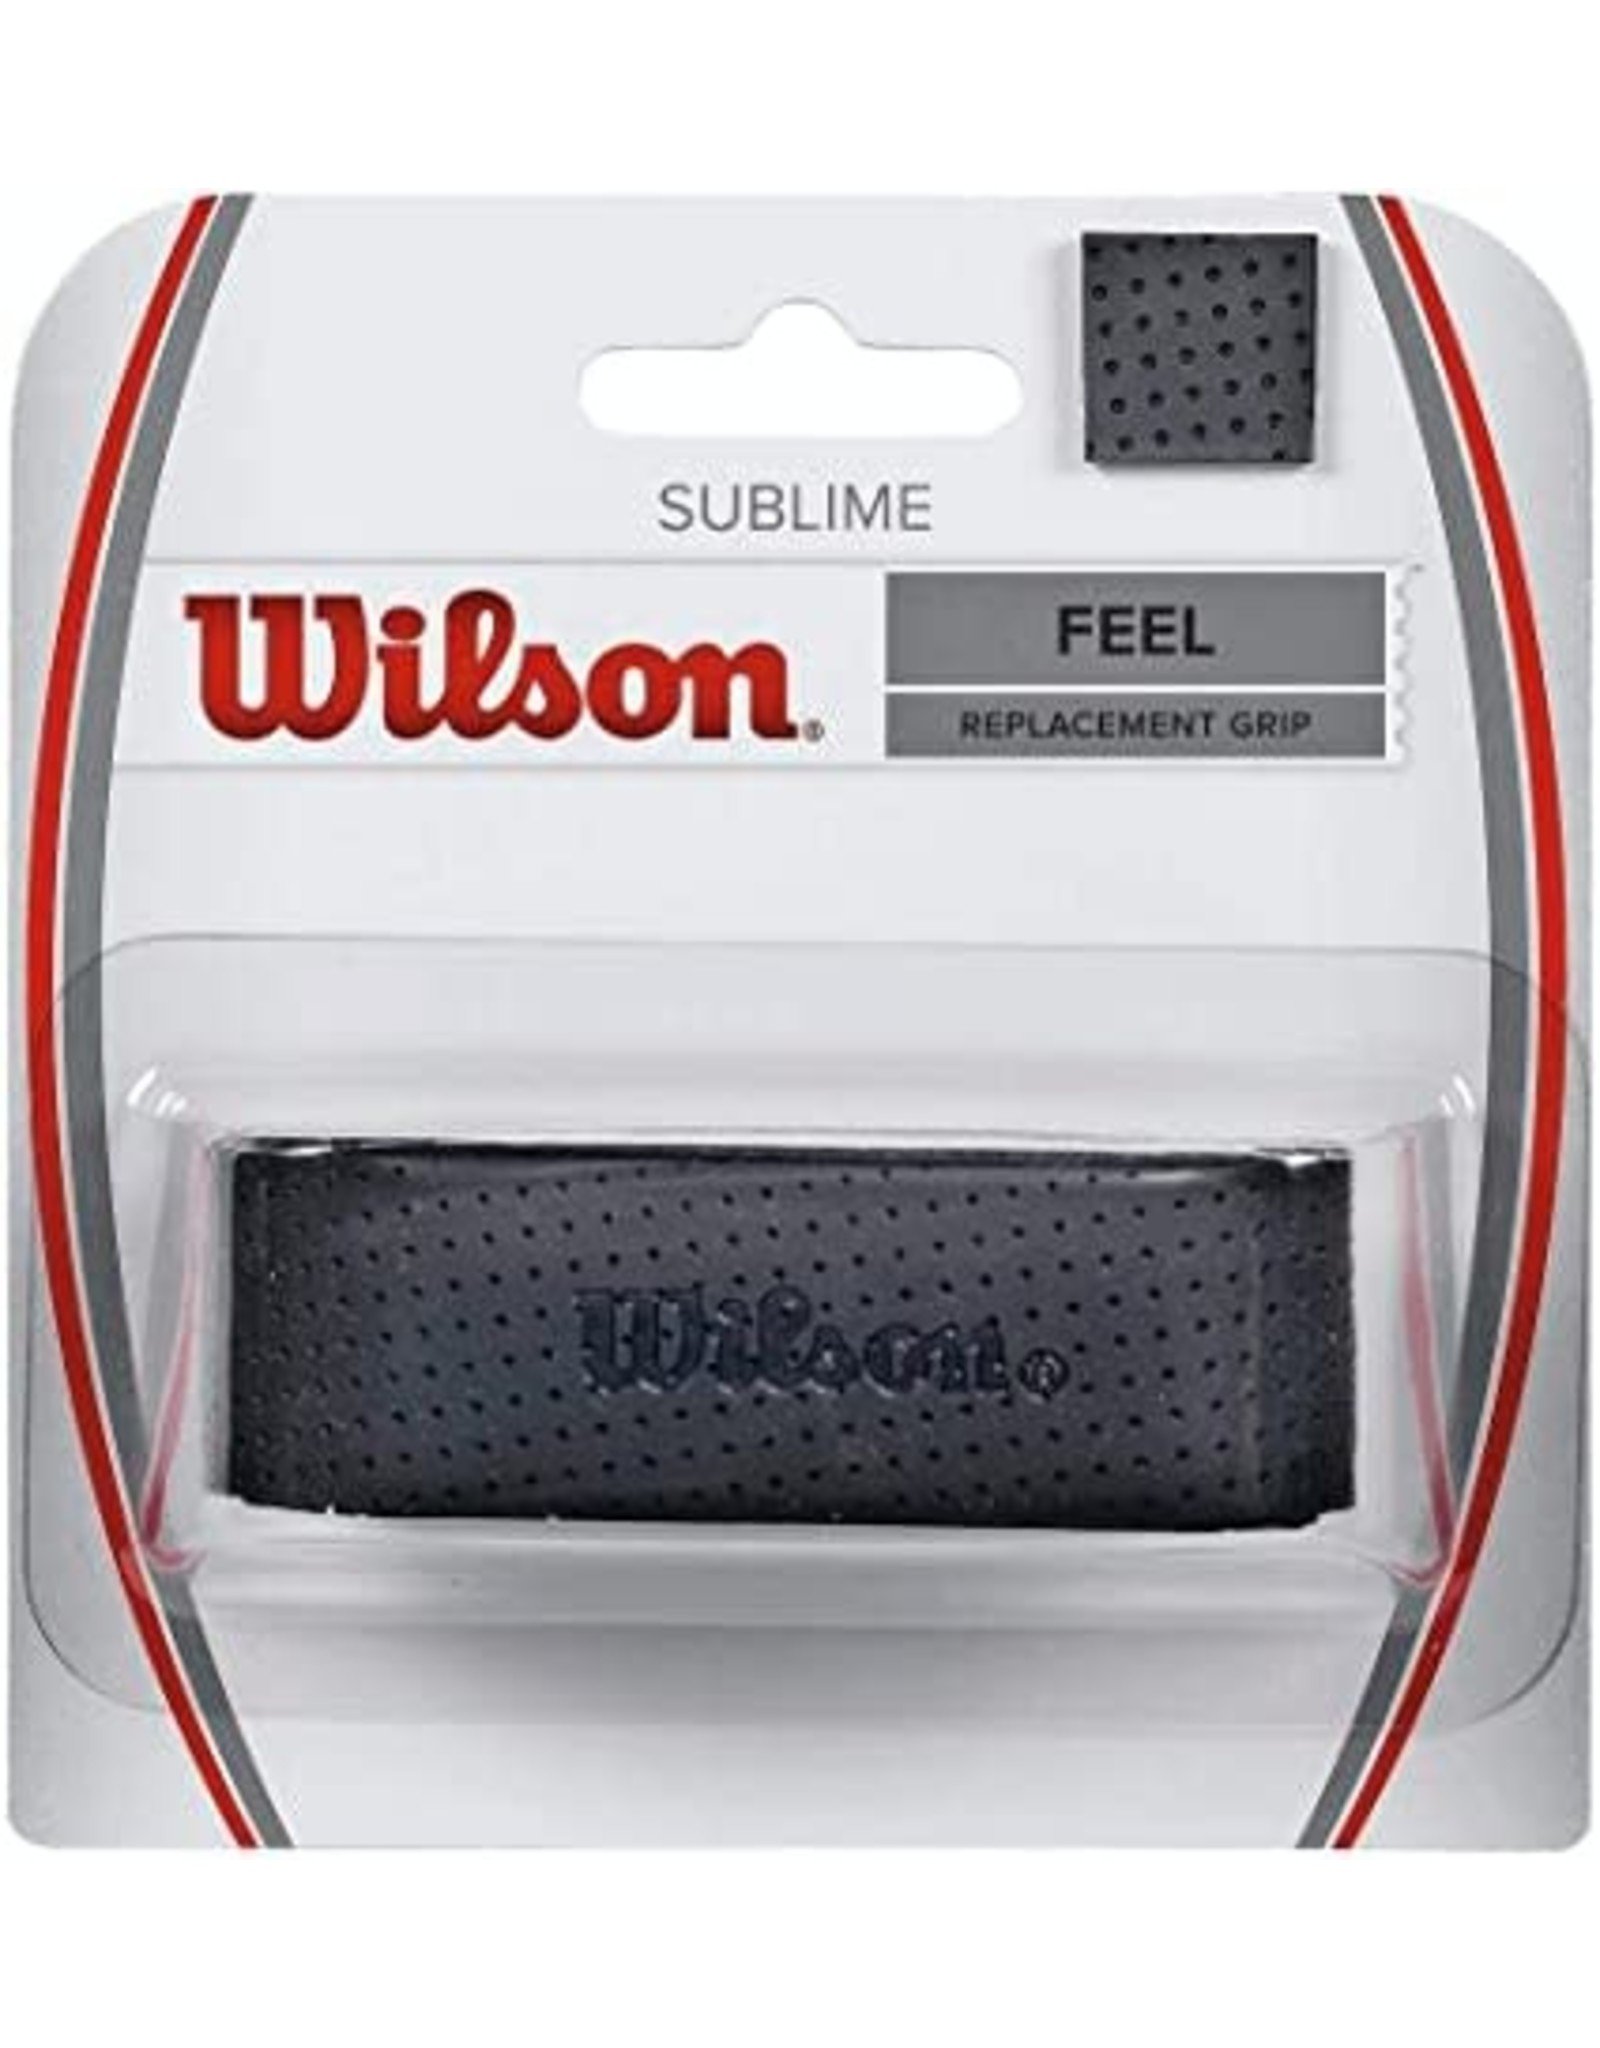 Wilson Wilson Sublime Replacement Grip